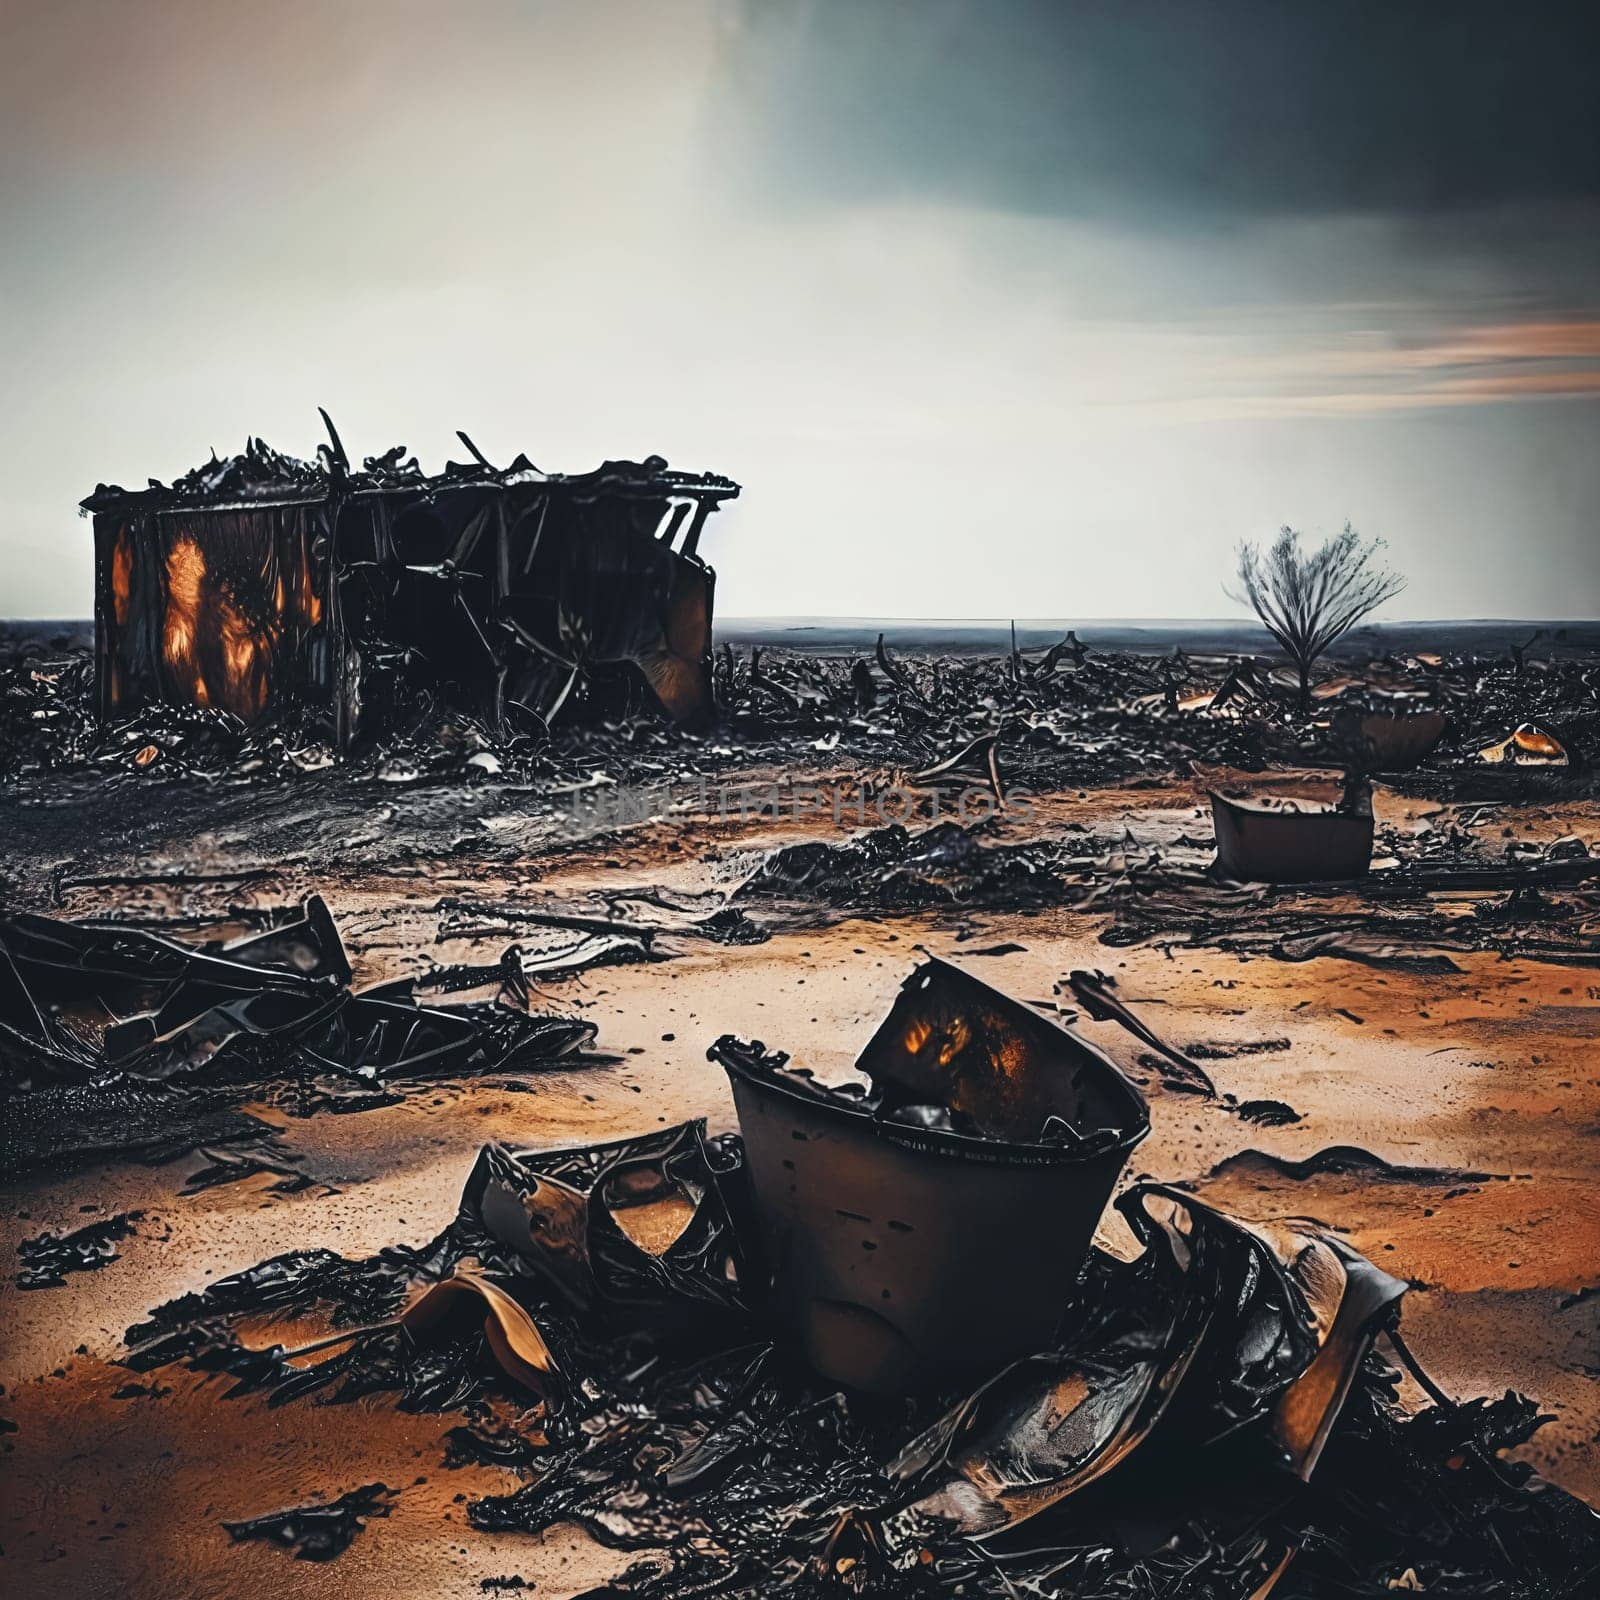 Devastated Landscapes. Disaster with scorched earth by GoodOlga